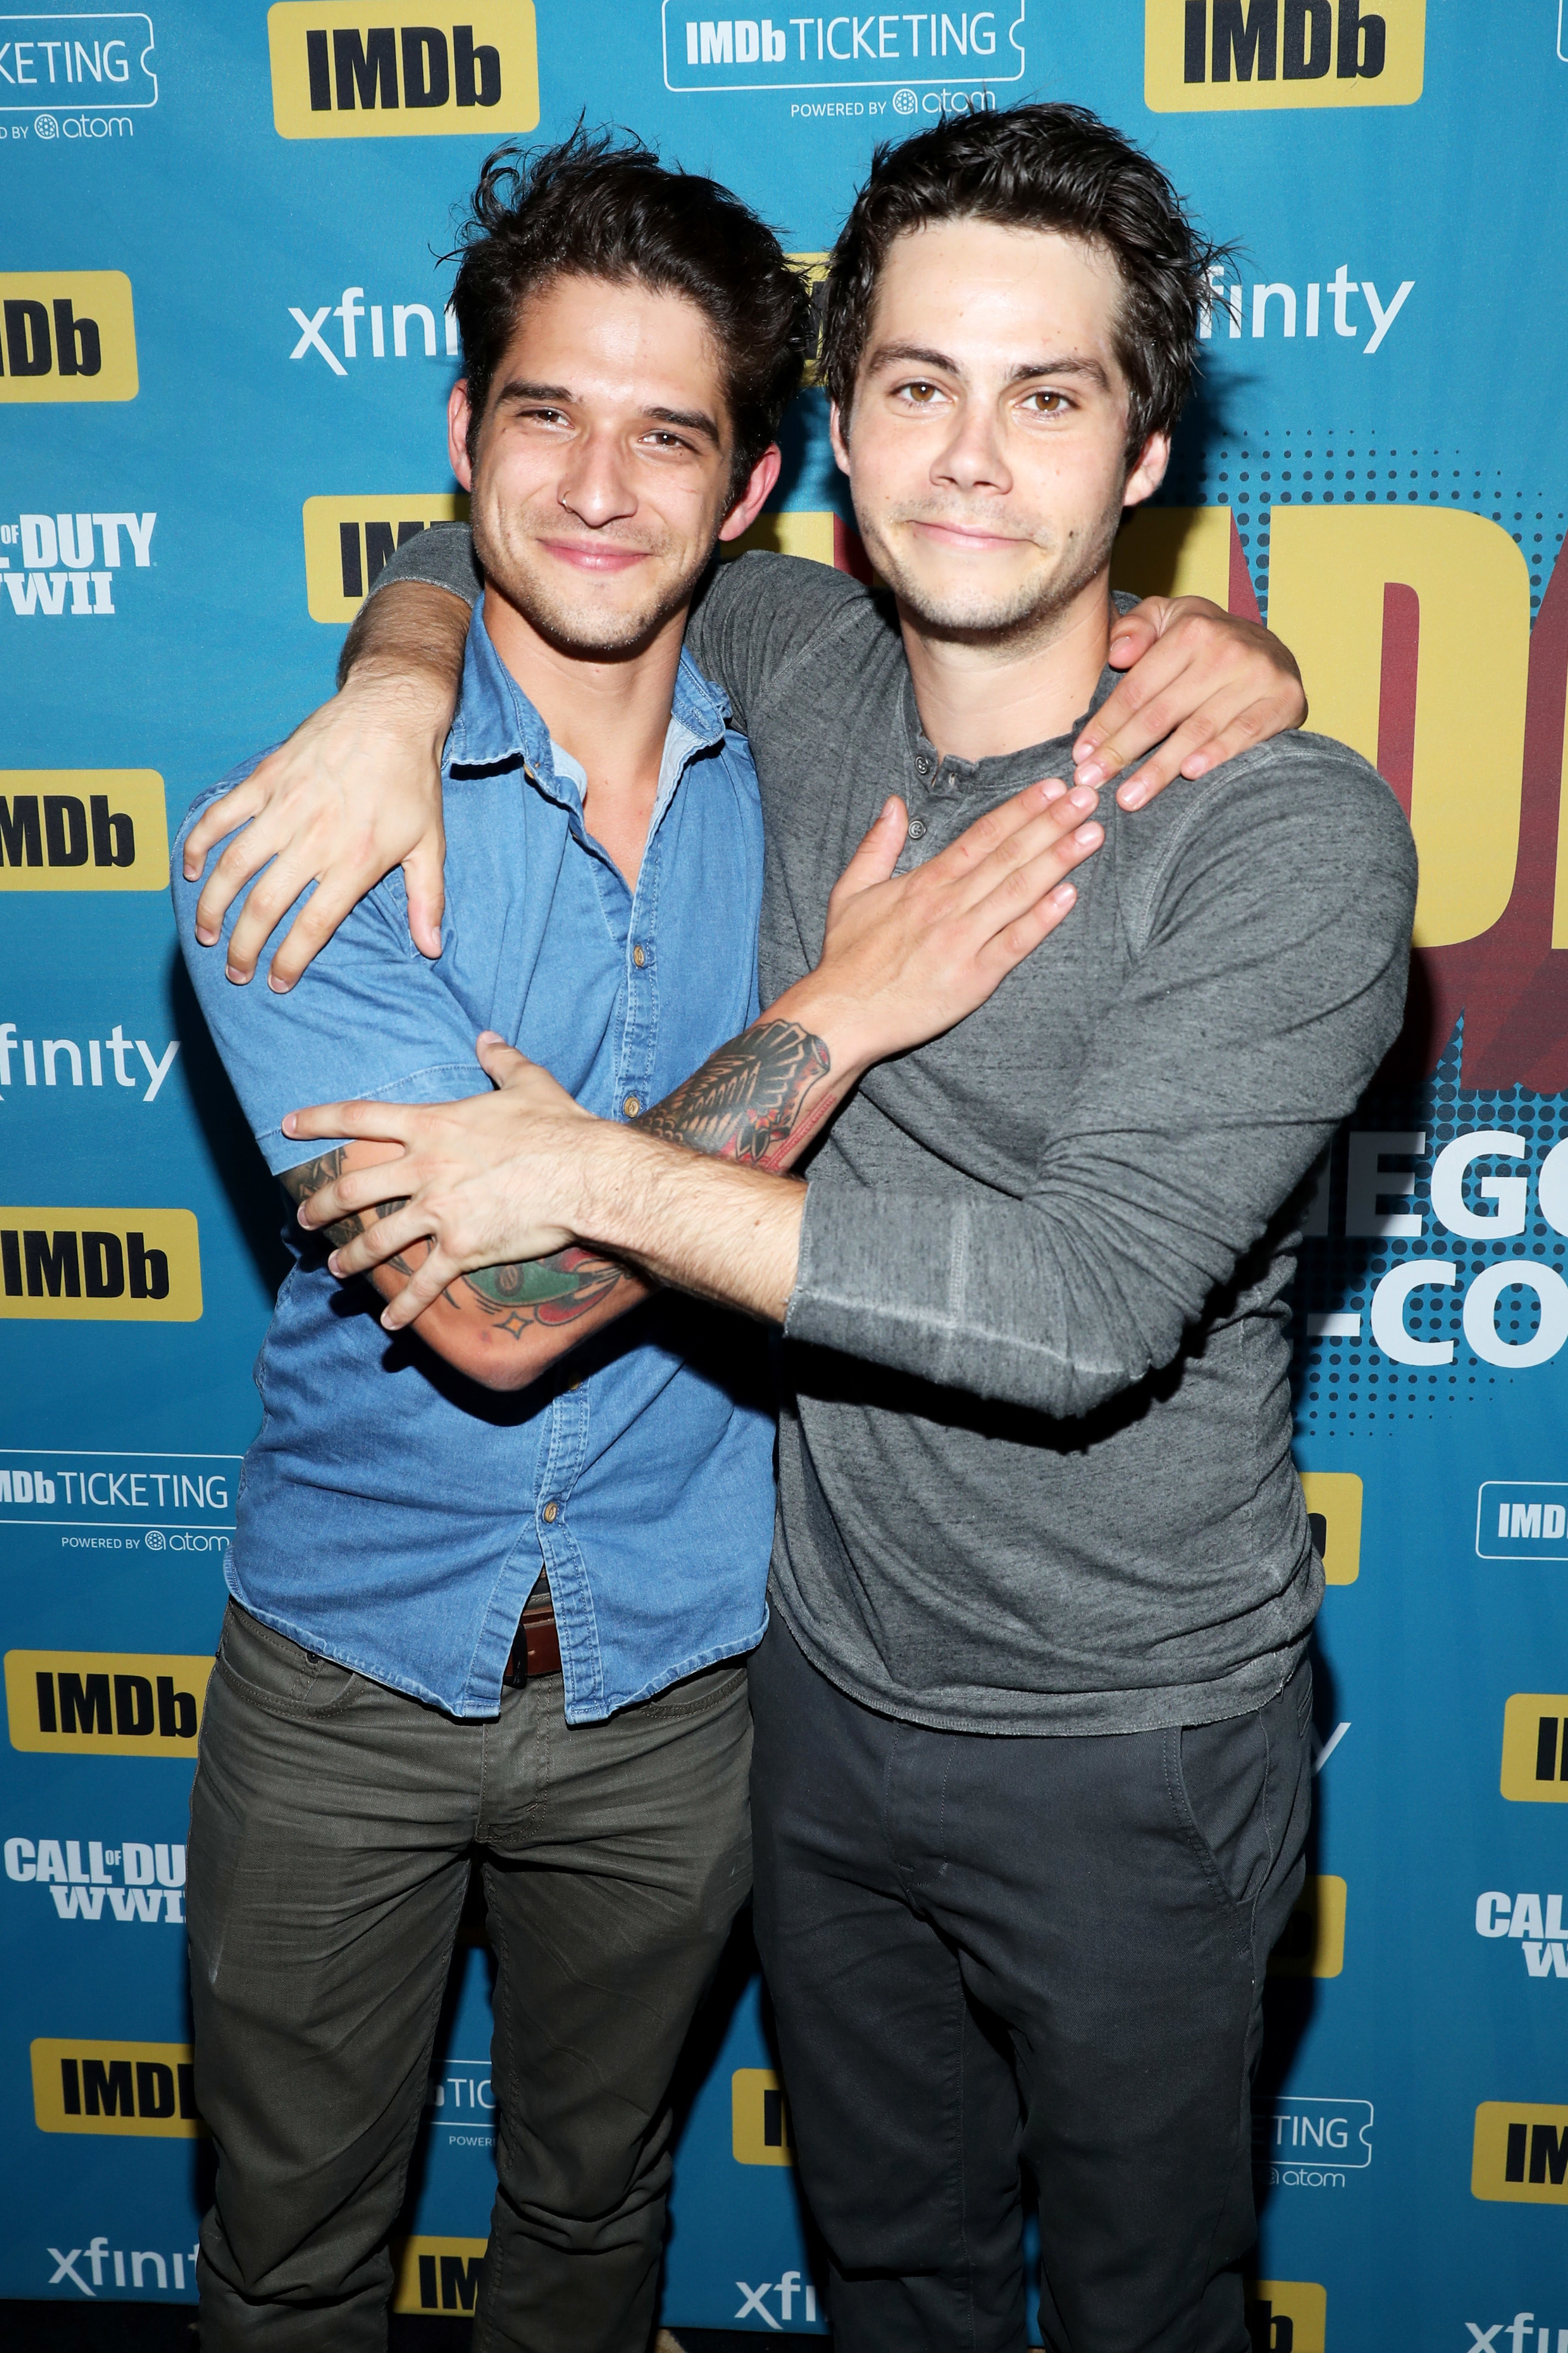 Tyler and Dylan at an event